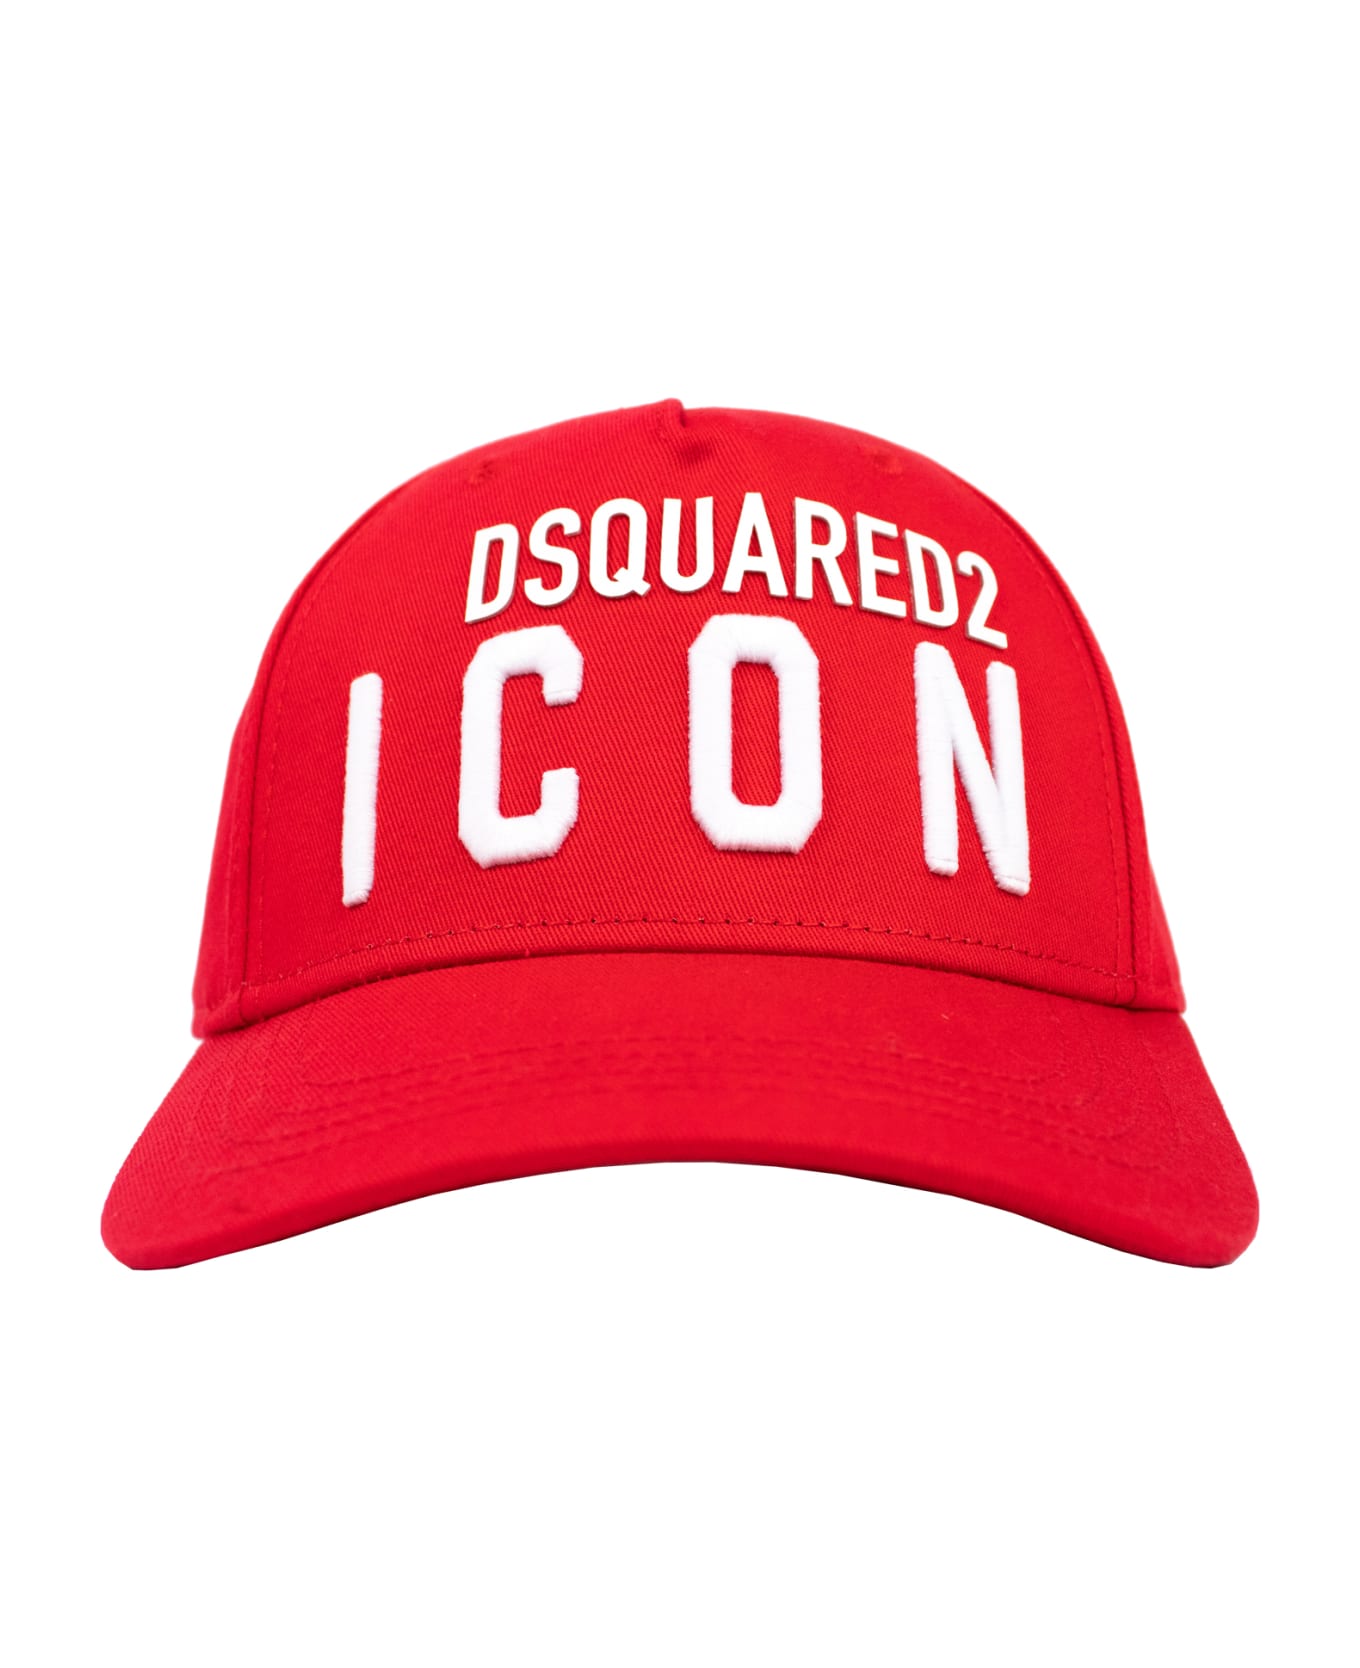 Dsquared2 "icon" Baseball Hat - Red アクセサリー＆ギフト